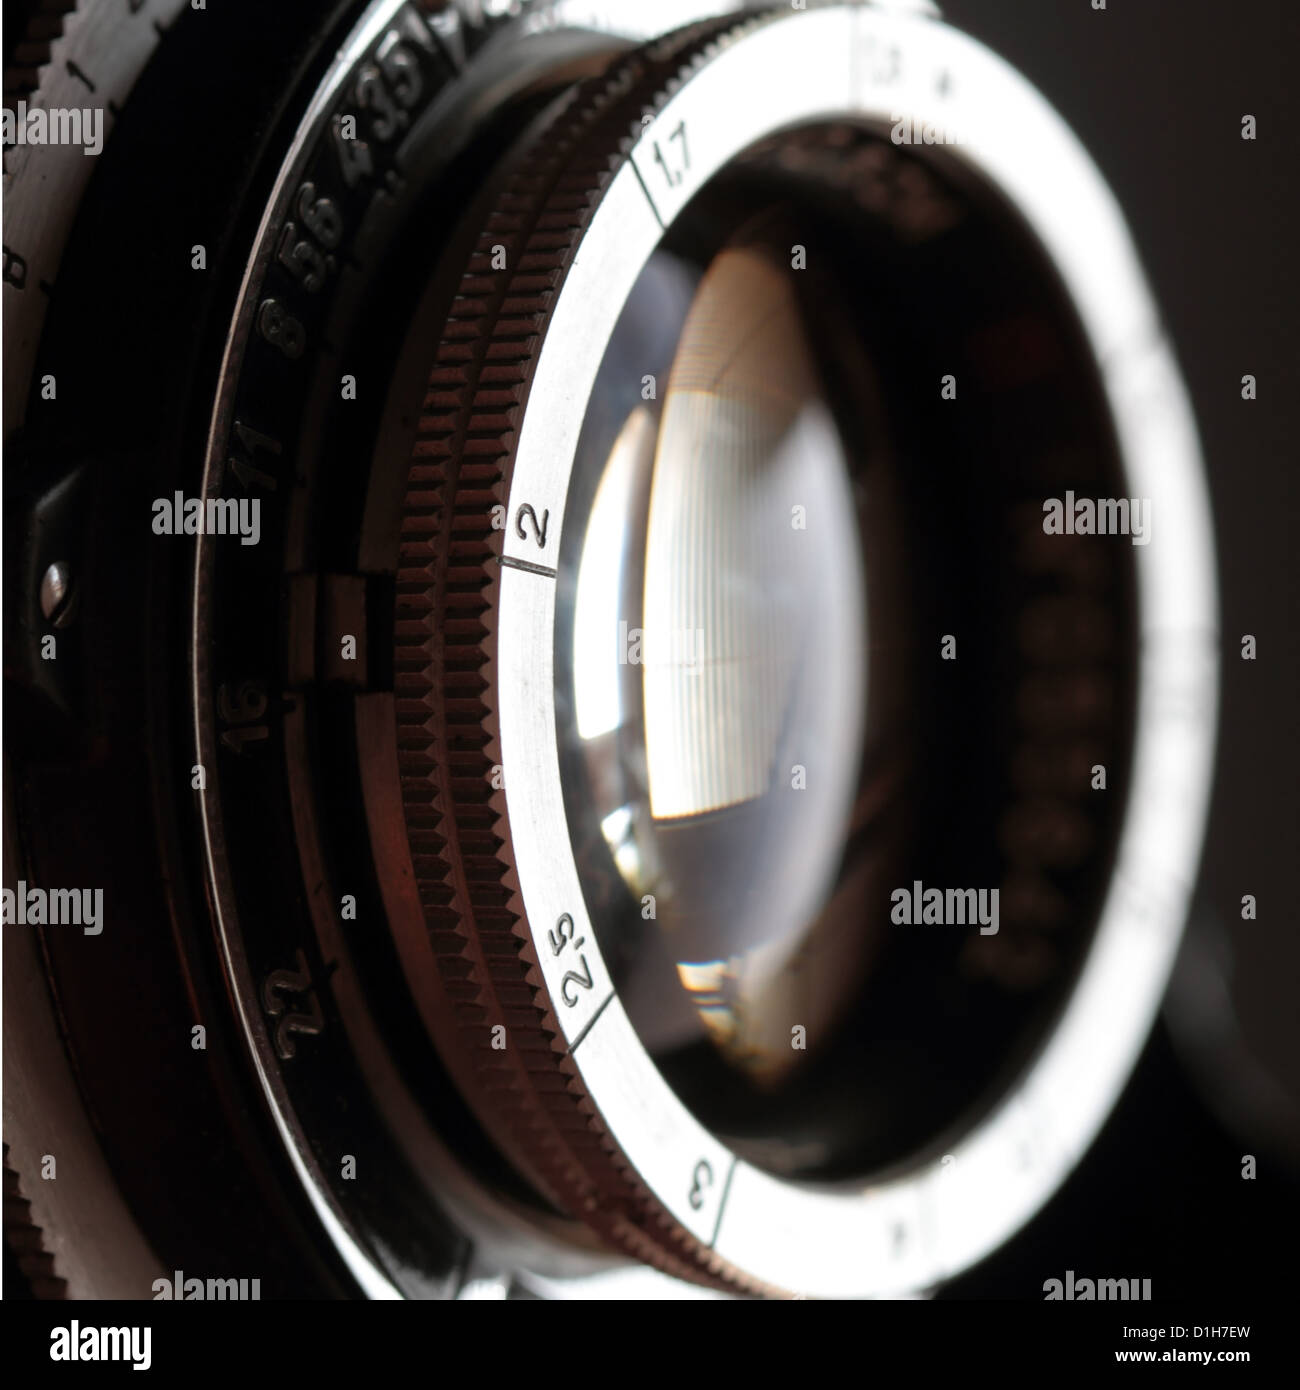 An old camera lens close-up on a dark background. Square format. Stock Photo